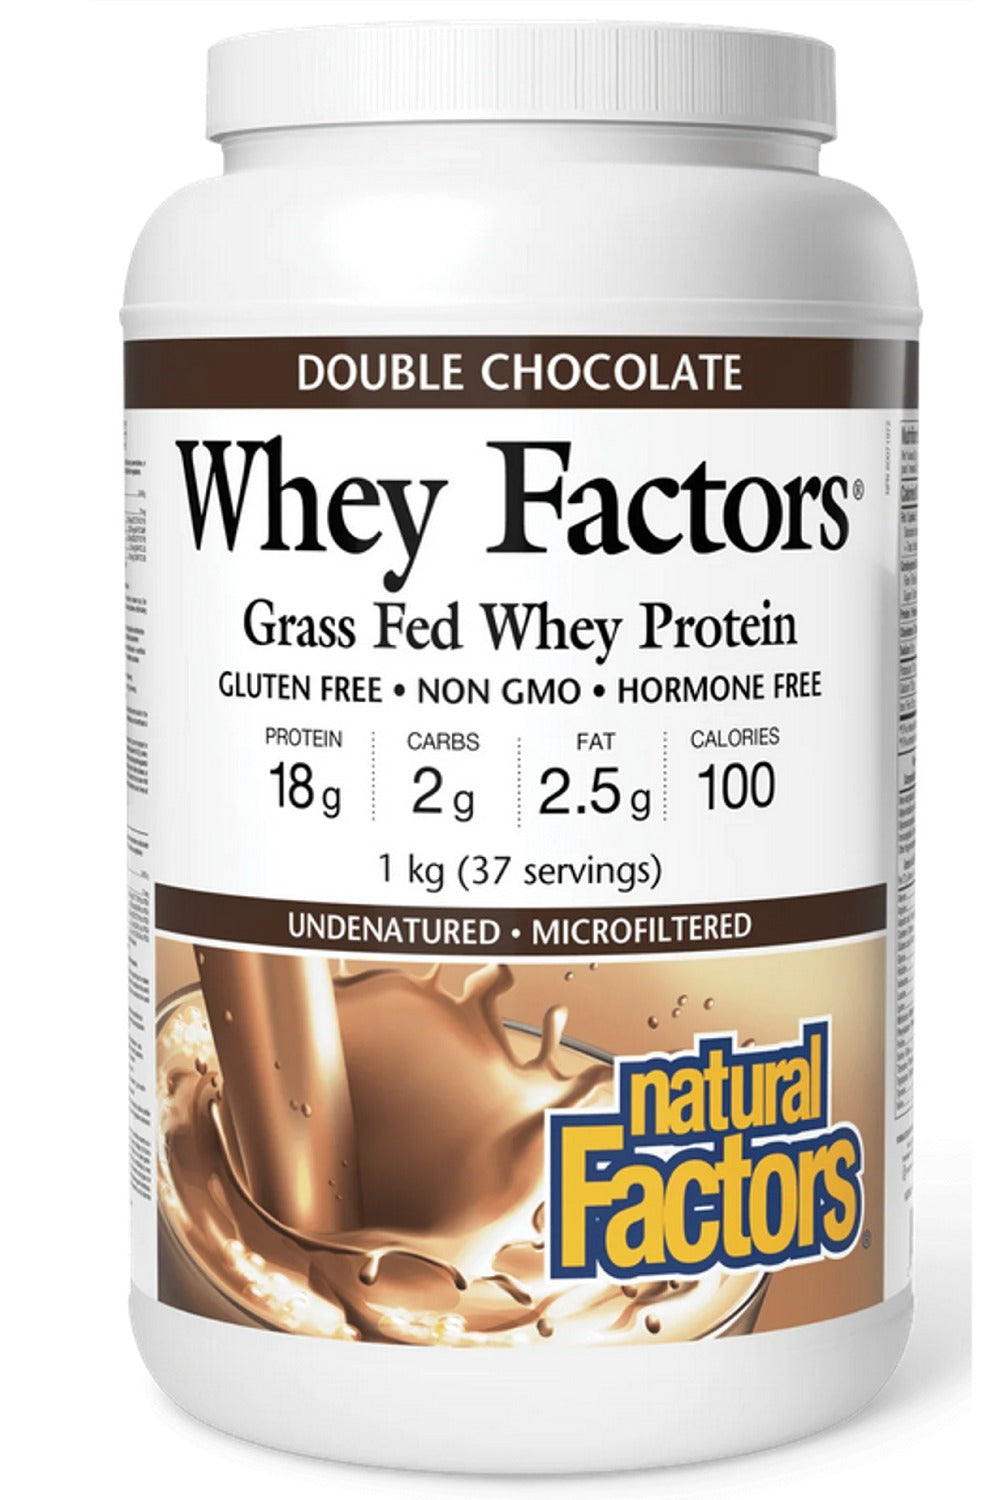 NATURAL FACTORS Grass Fed Whey Protein (Double Chocolate - 37 Servings)